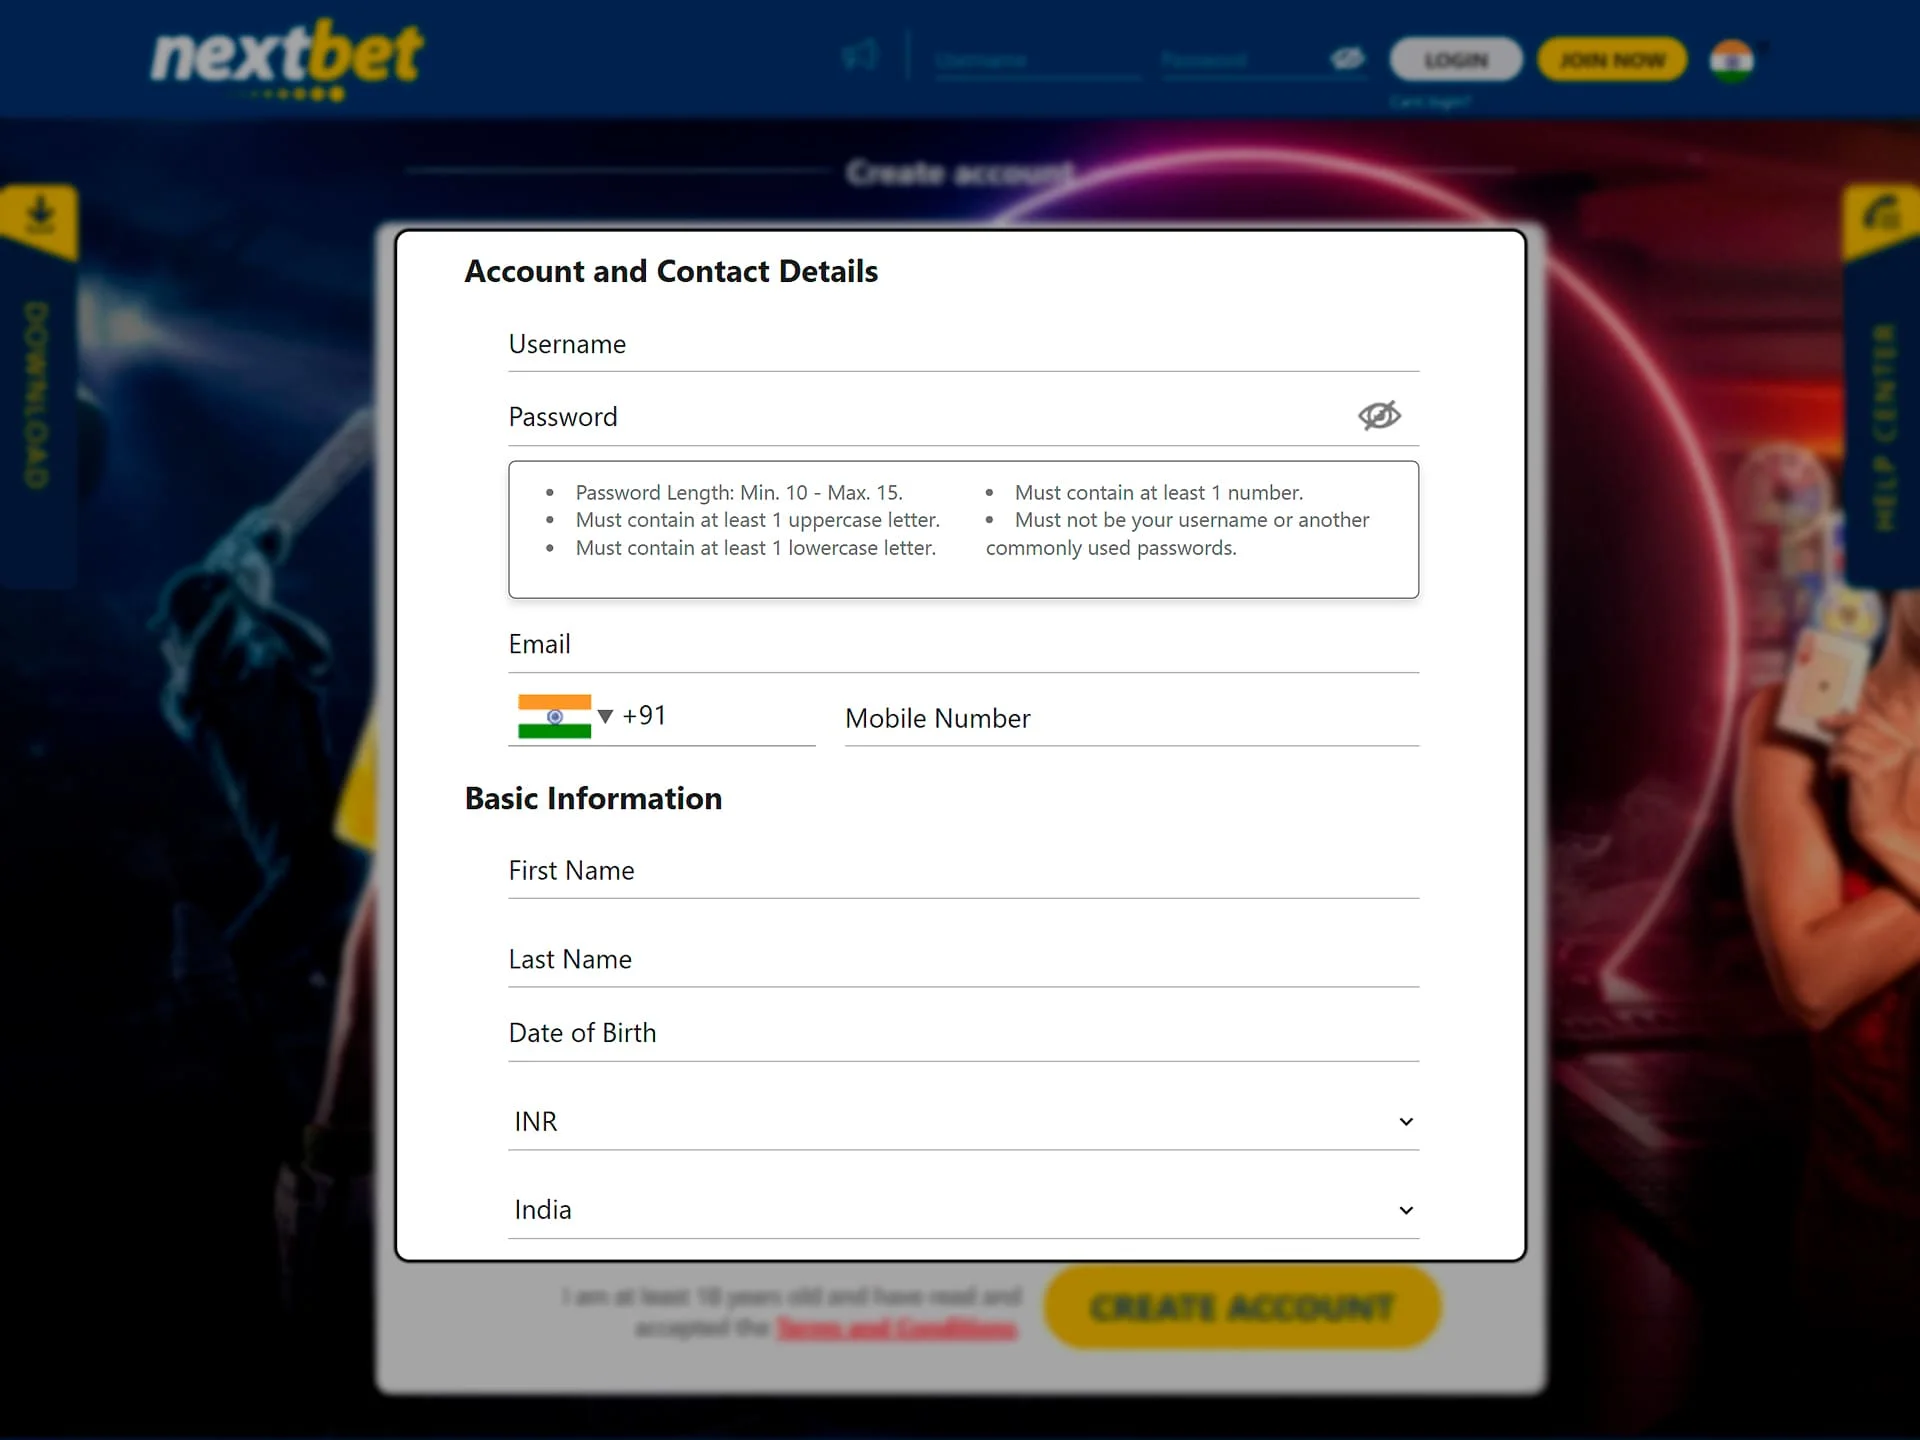 Come up with a login and password for your Nextbet account and provide personal and contact information.